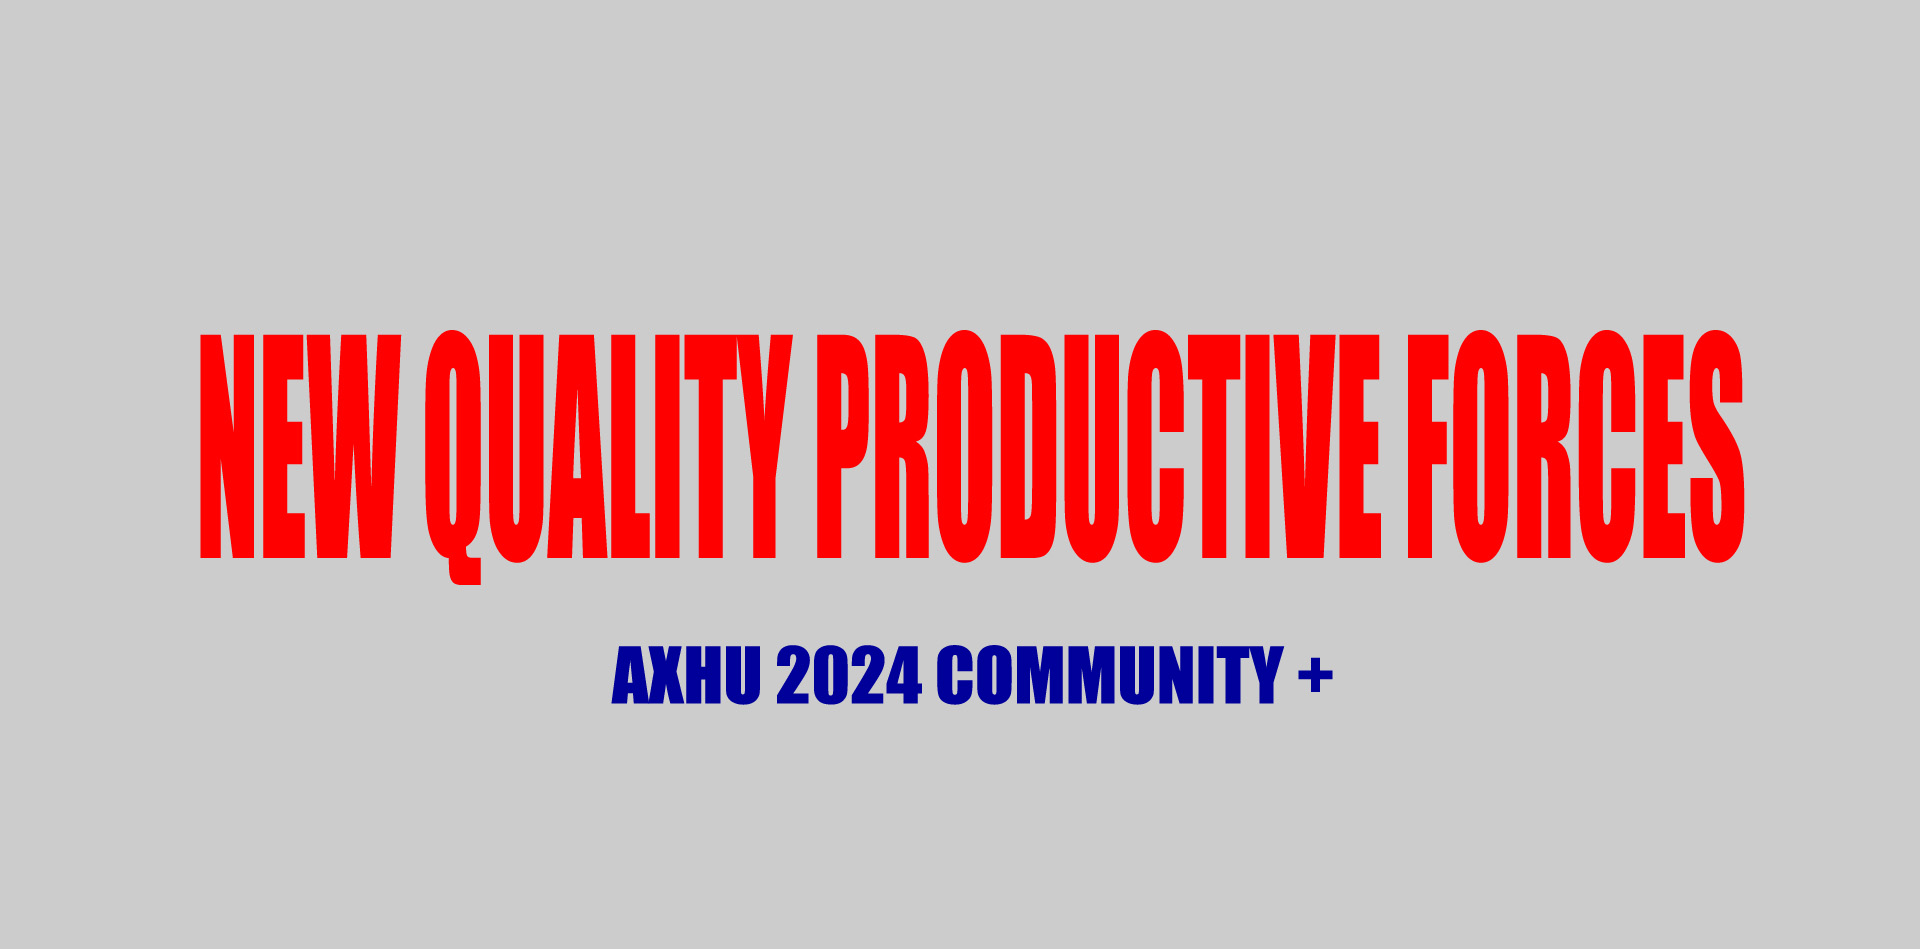 2024 AXHU New Quality Productive Forces